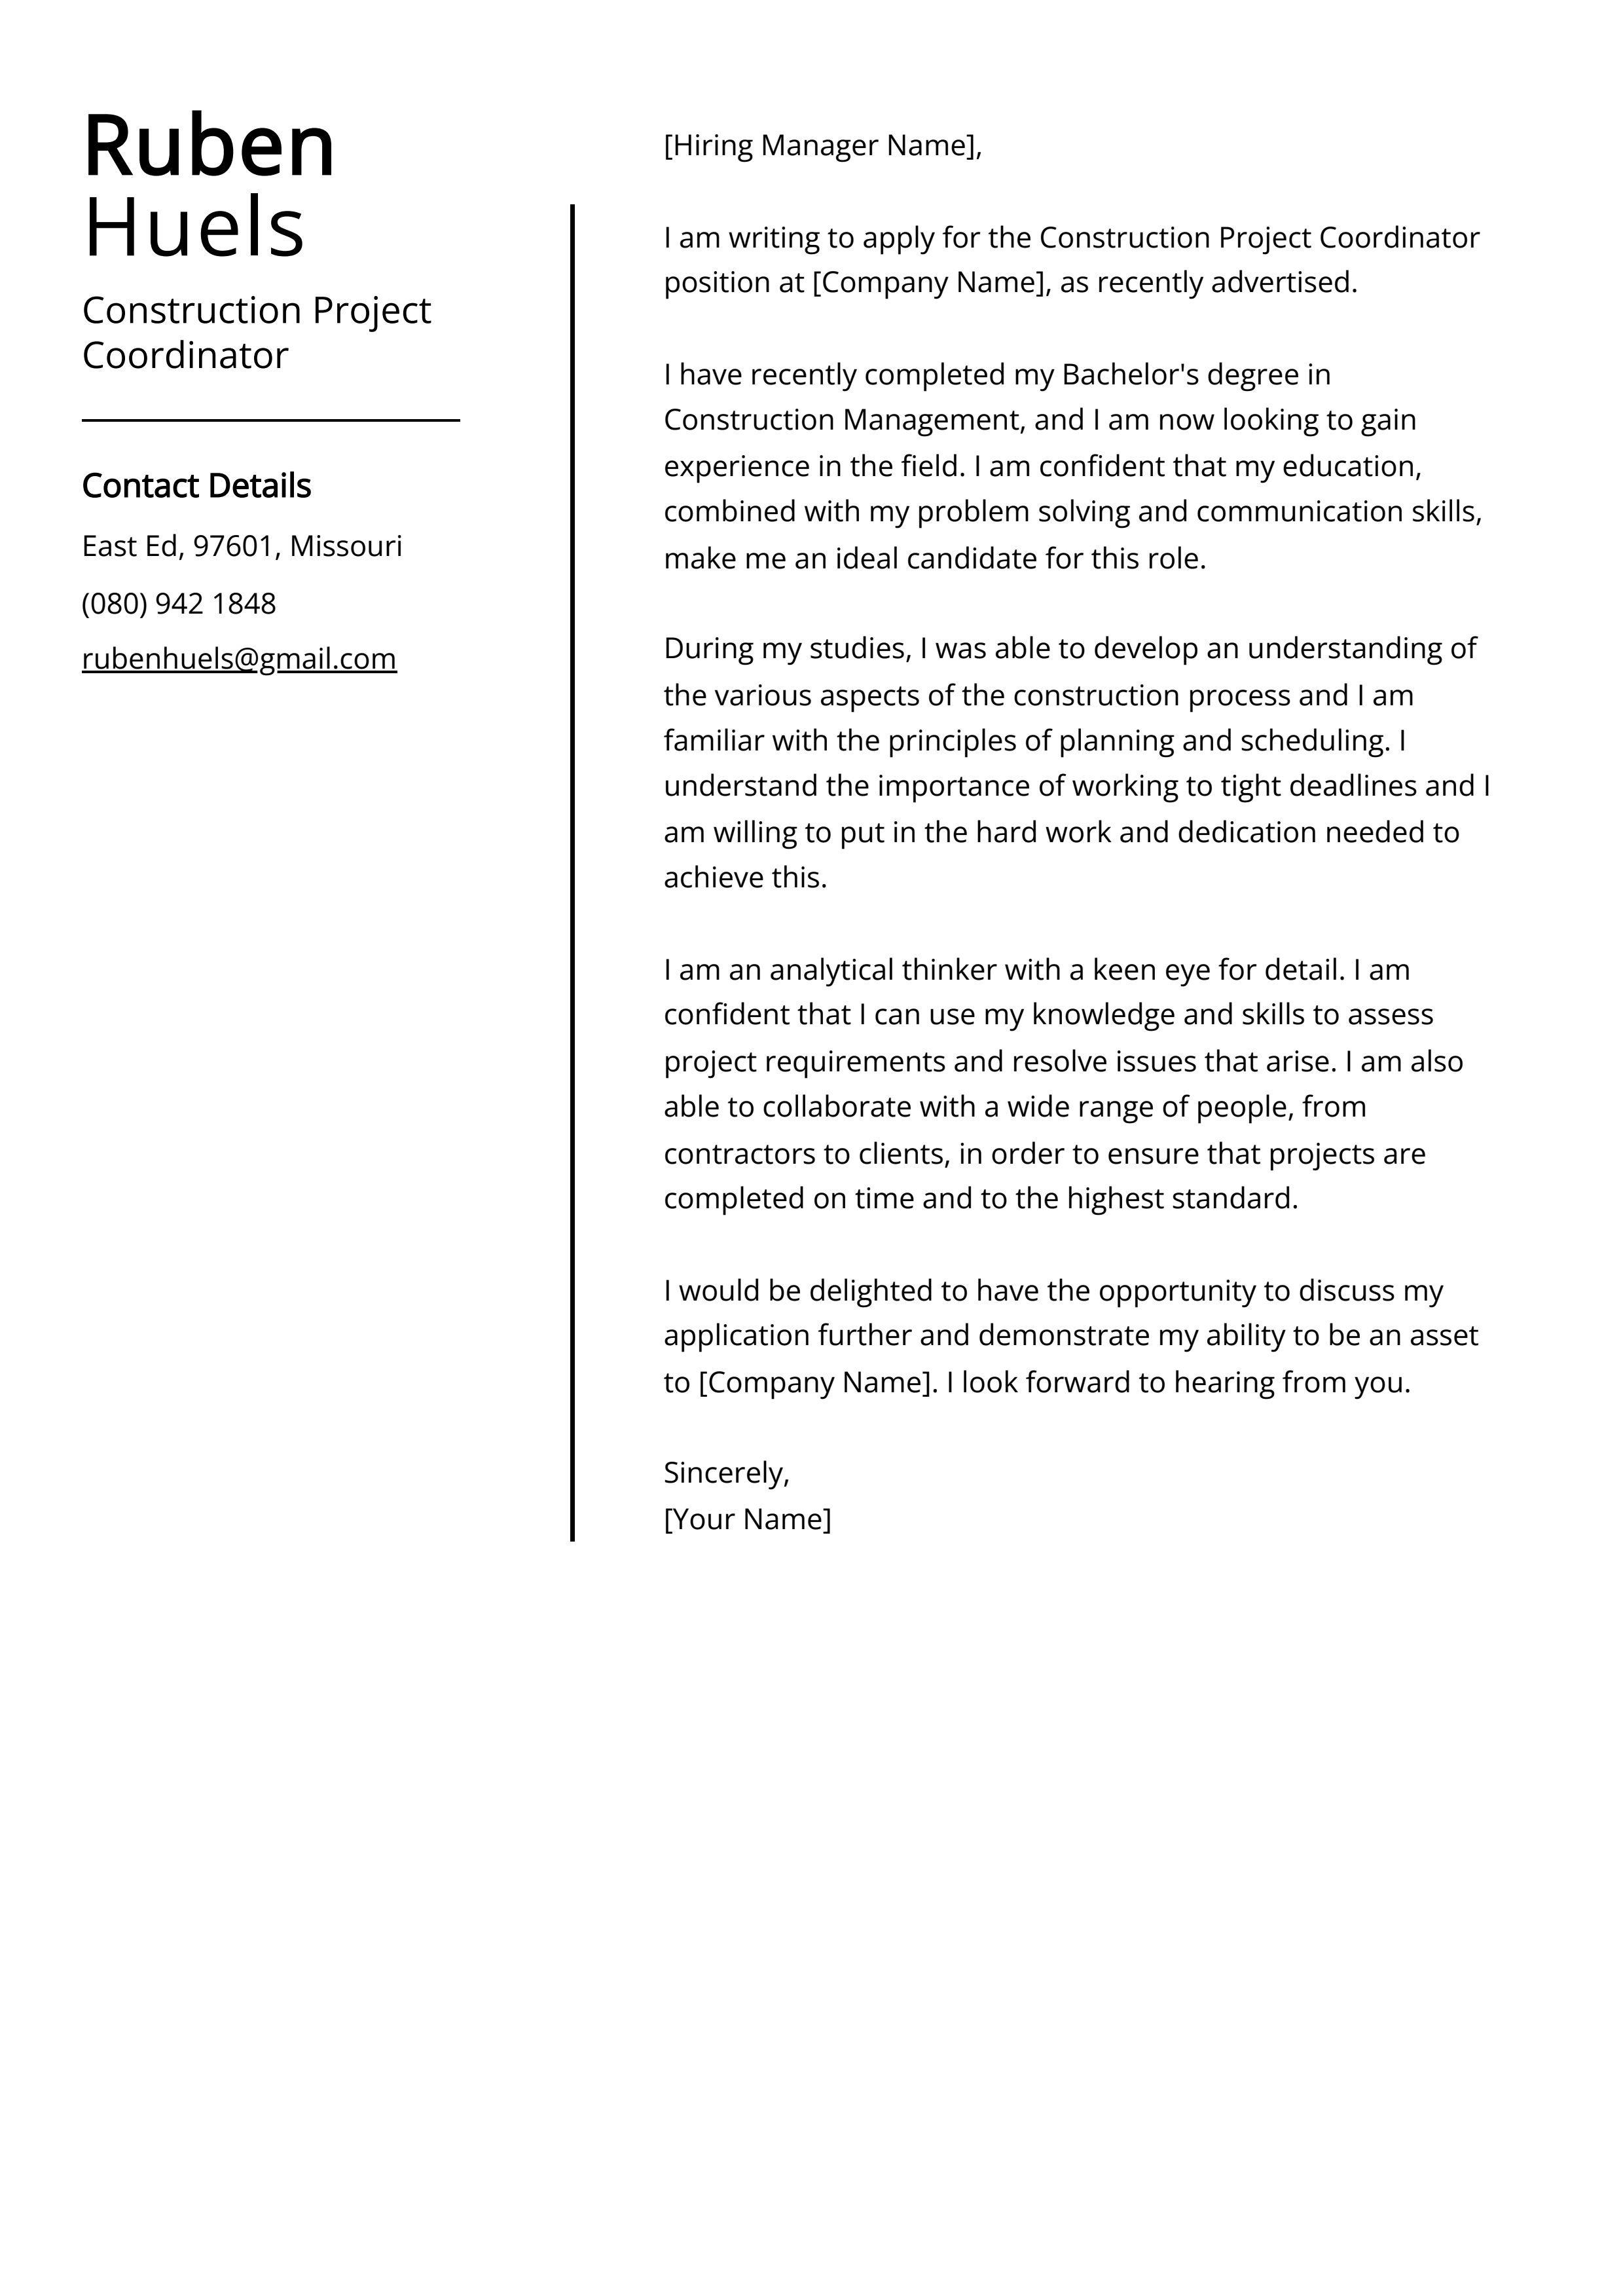 Construction Project Coordinator Cover Letter Example